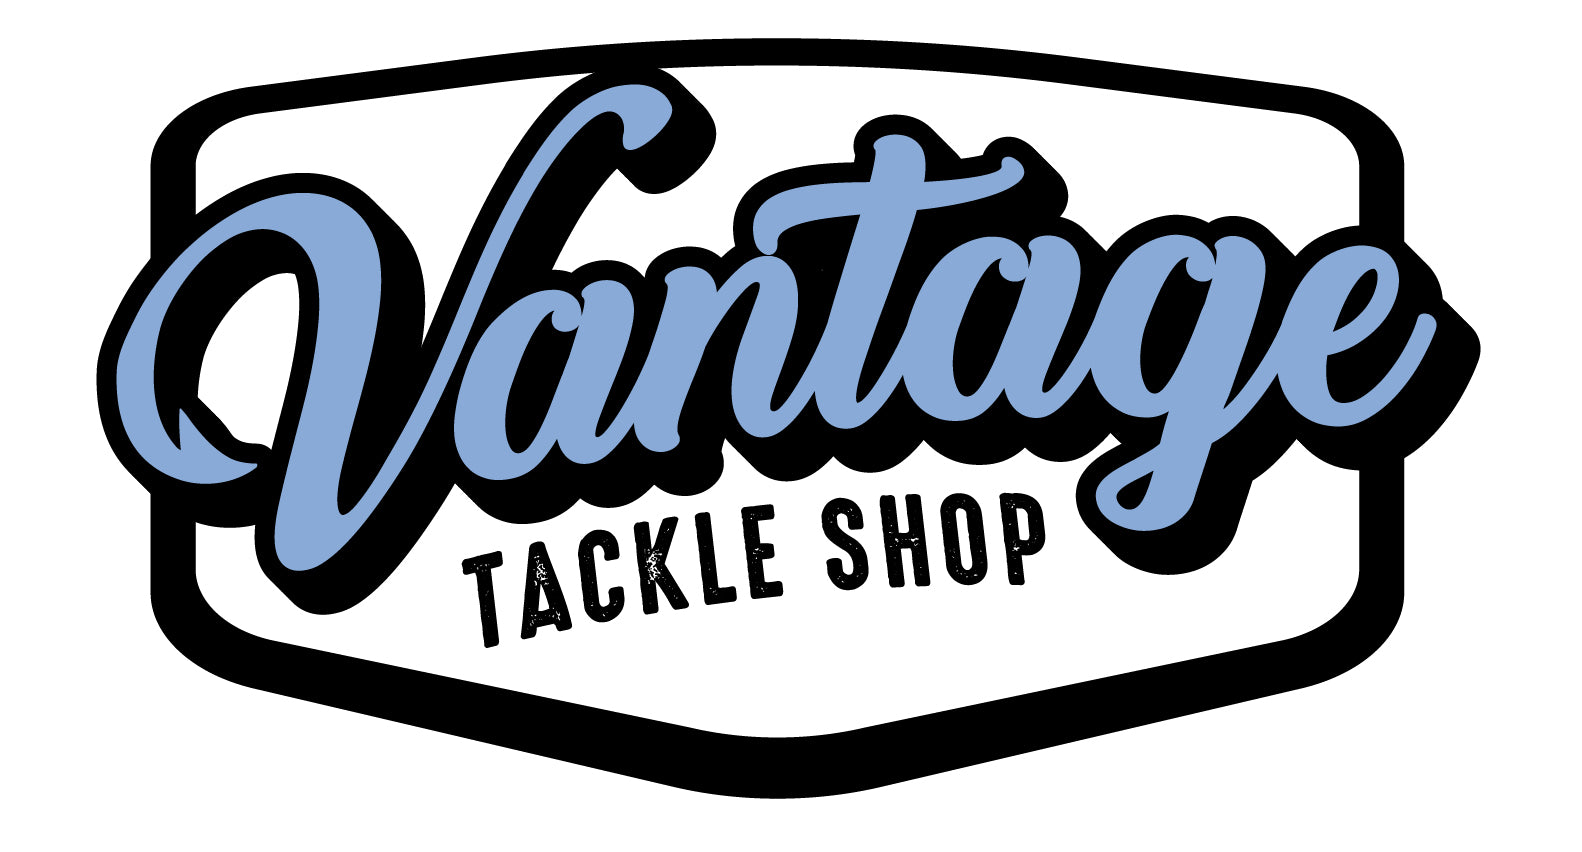 The largest selection of custom fishing tackle on the web